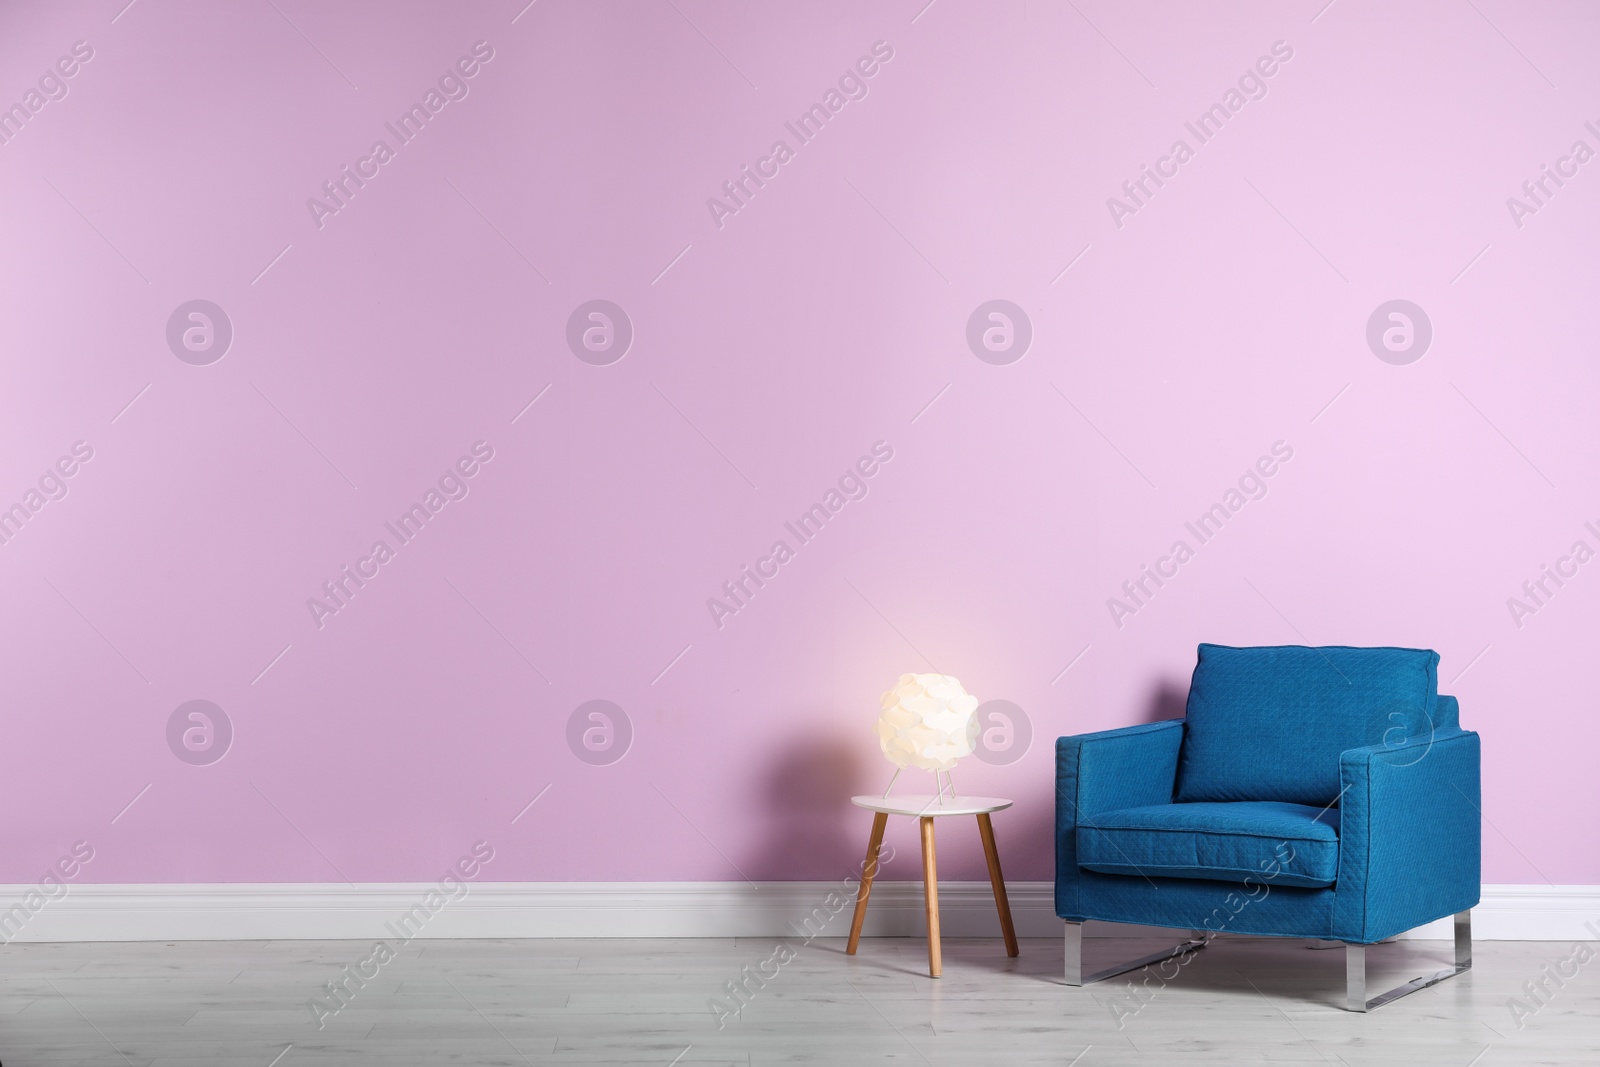 Photo of Comfortable armchair and lamp on table near color wall with space for text. Interior element